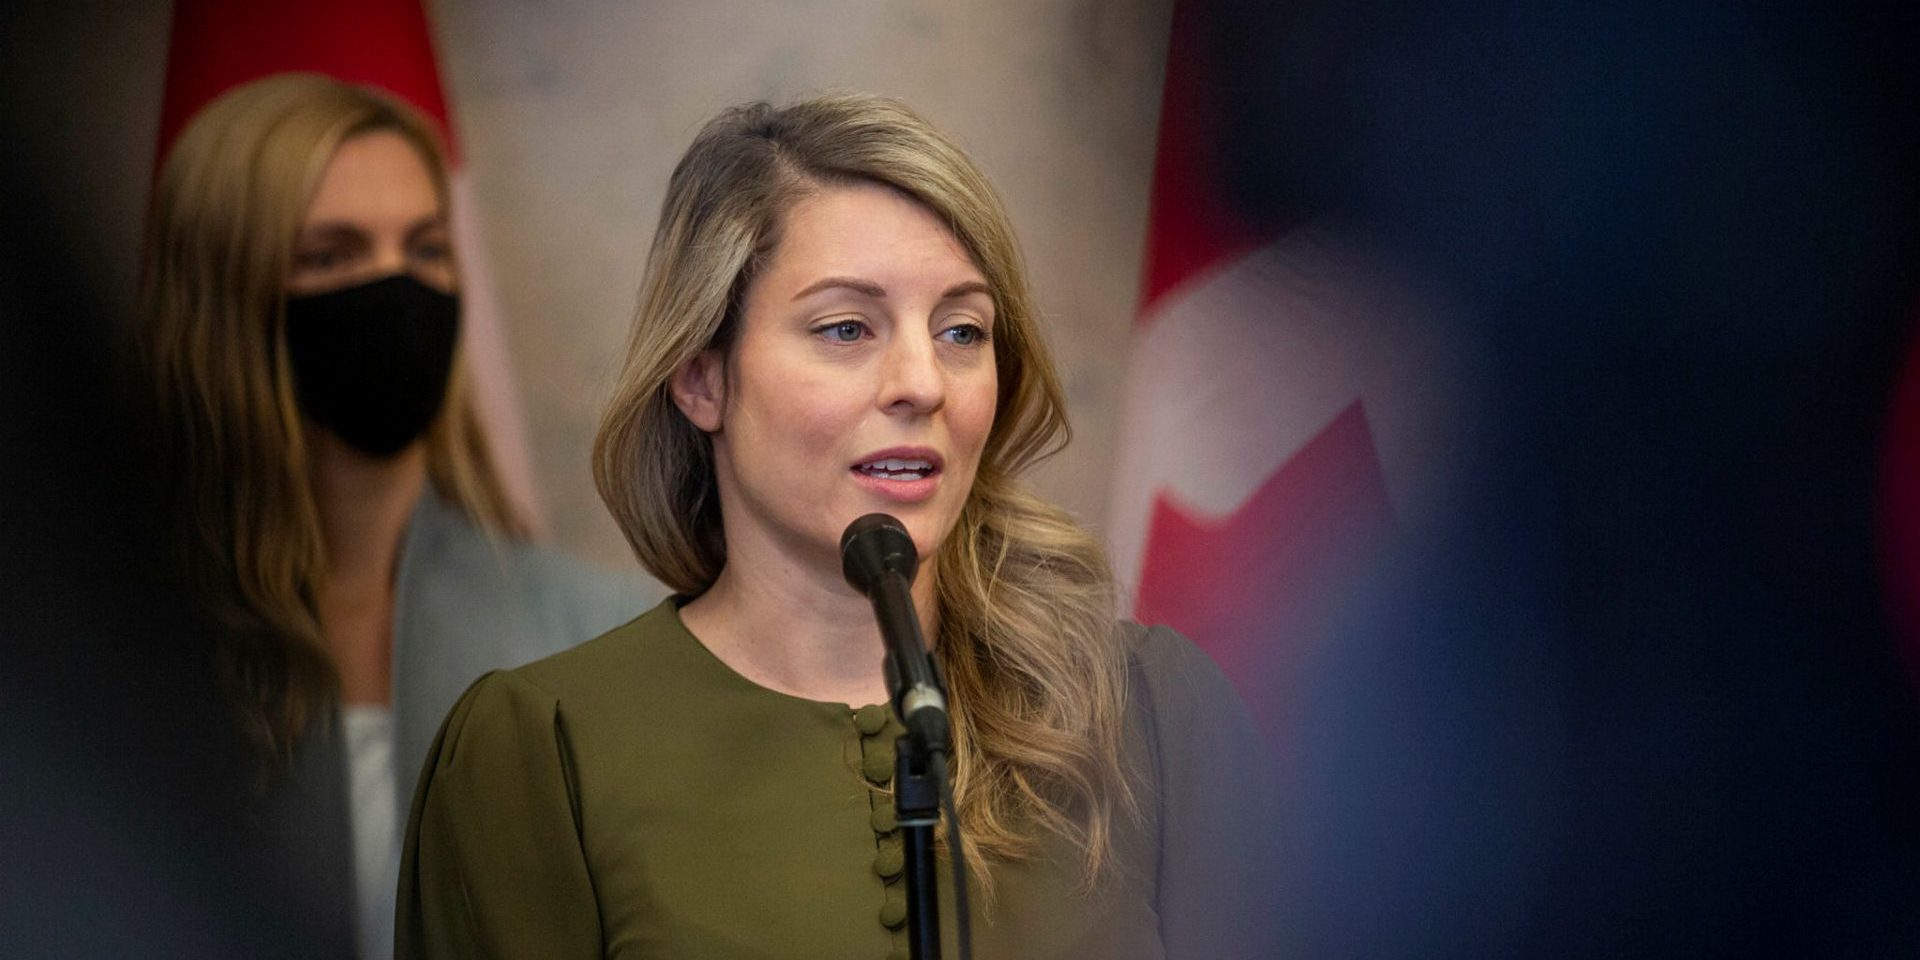 Melanie Joly. The Hill Times photograph by Andrew Meade